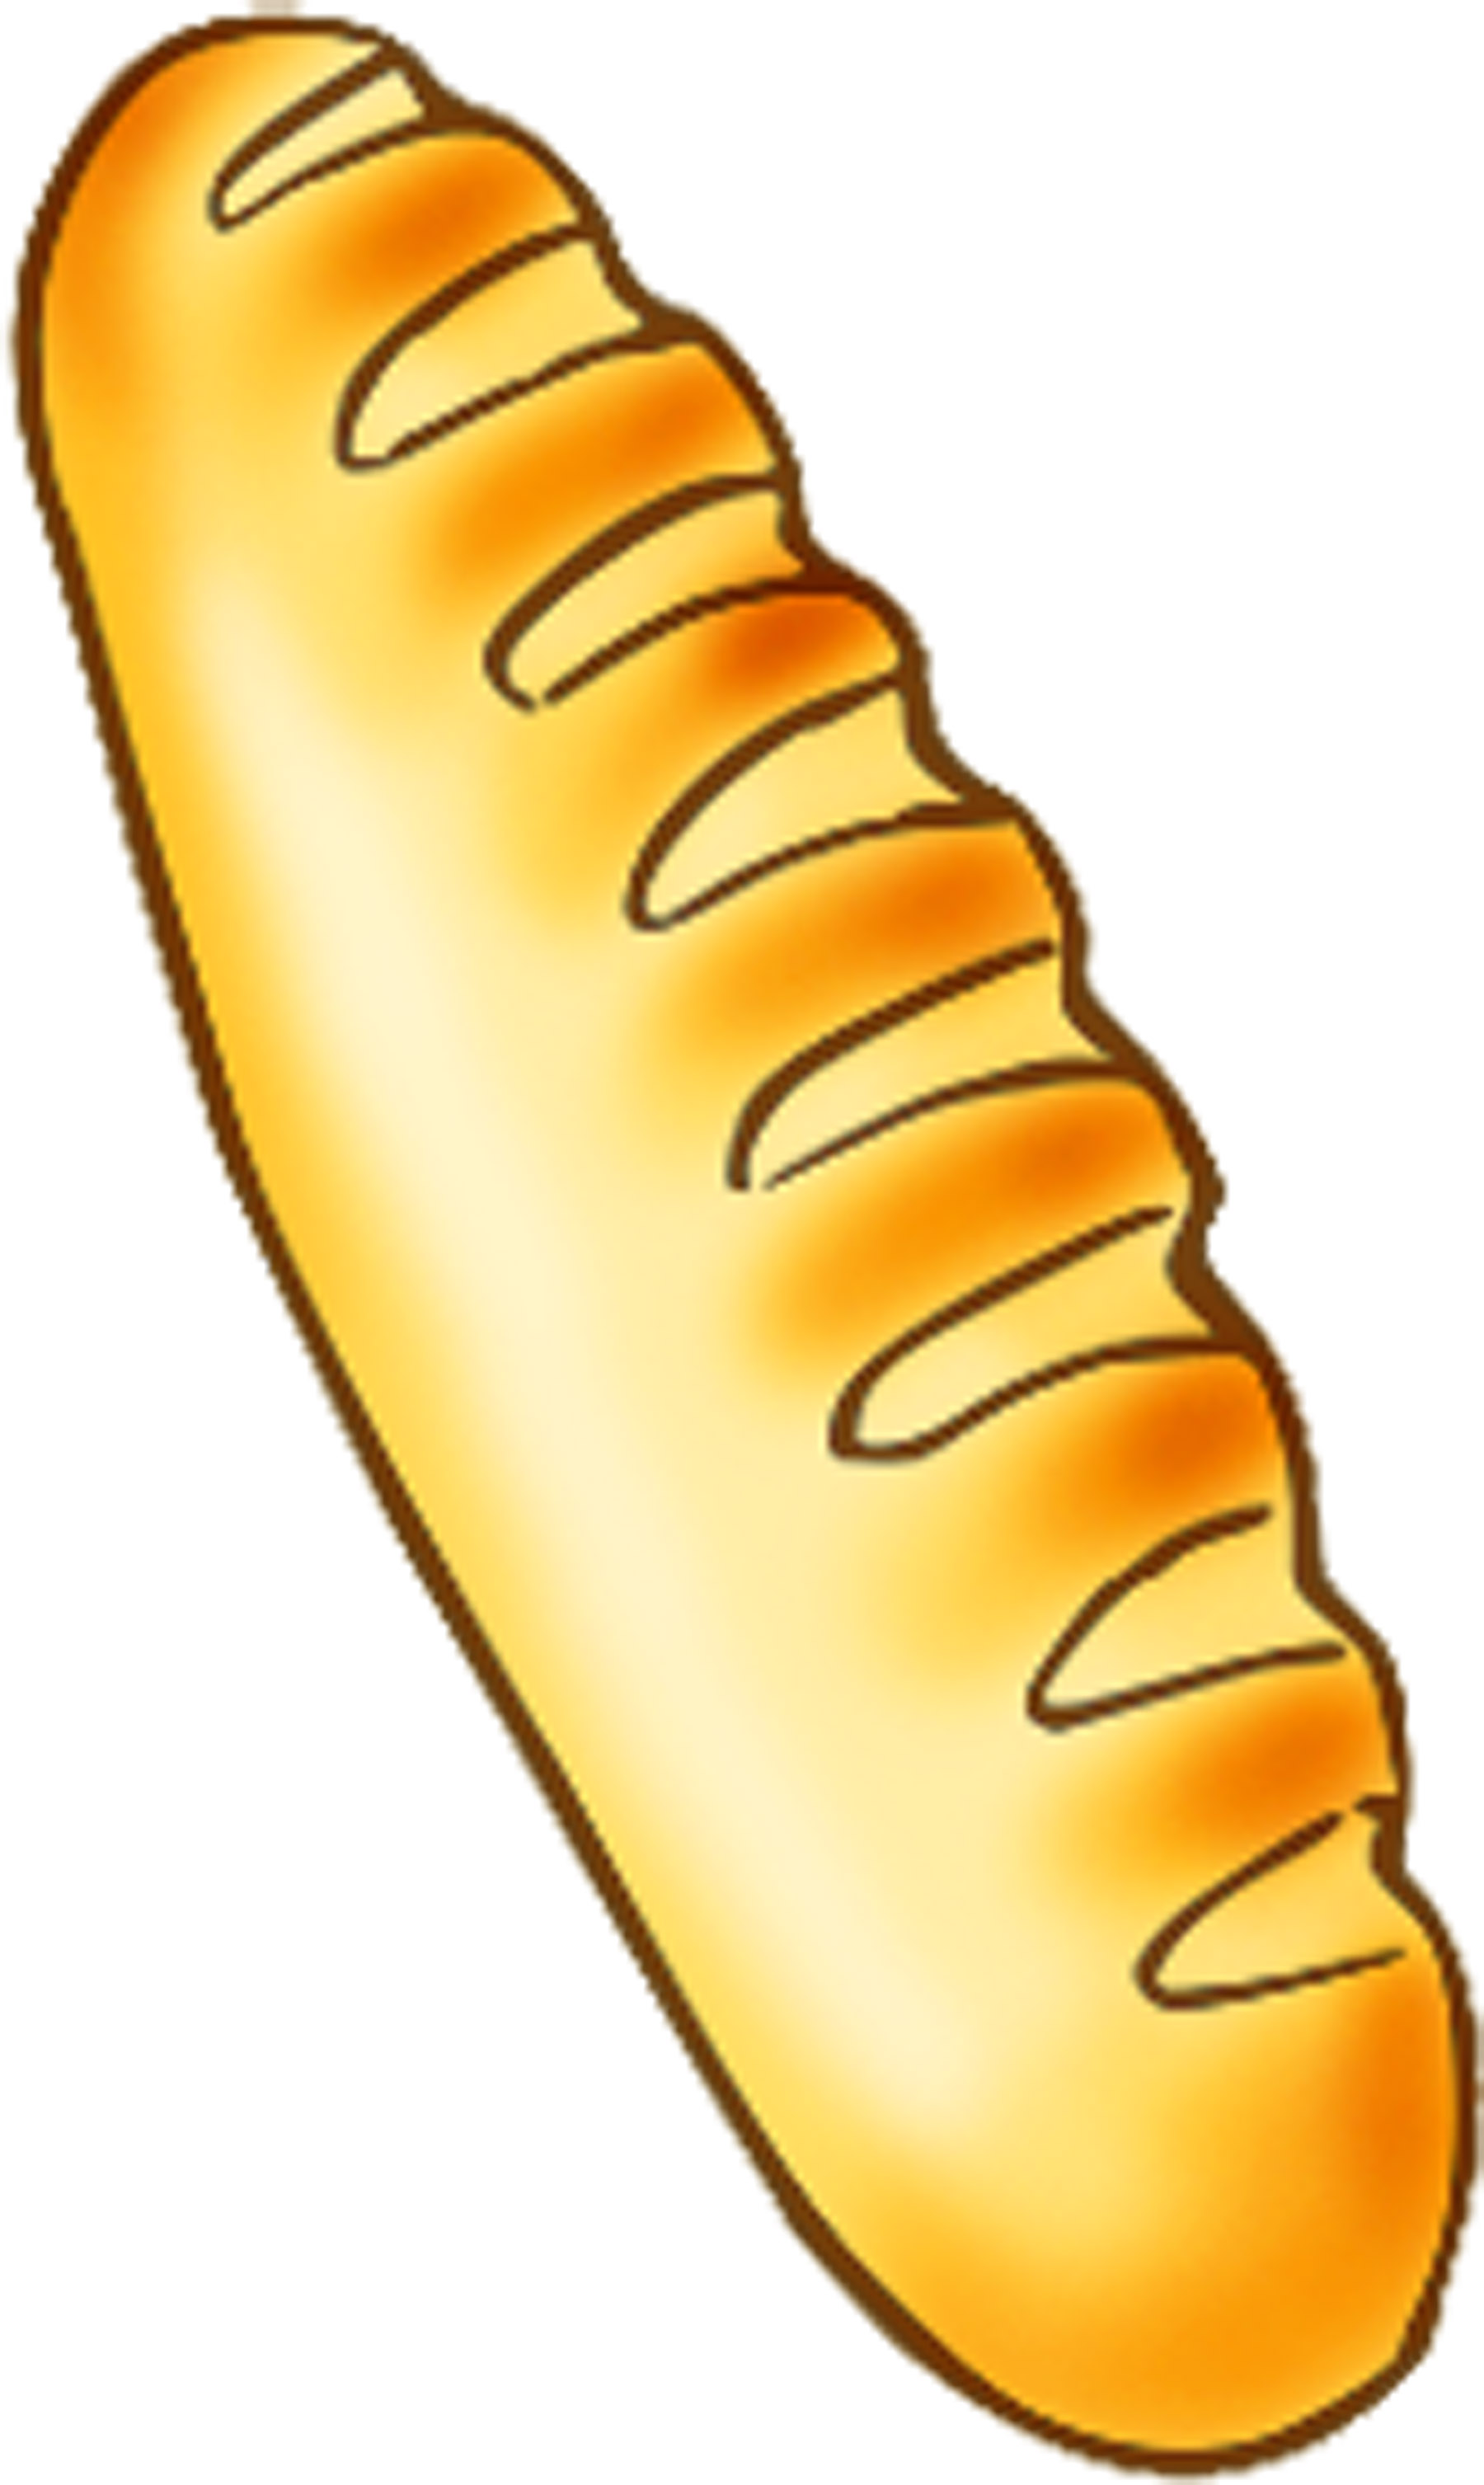 Bread clip art bread images image 7 wikiclipart